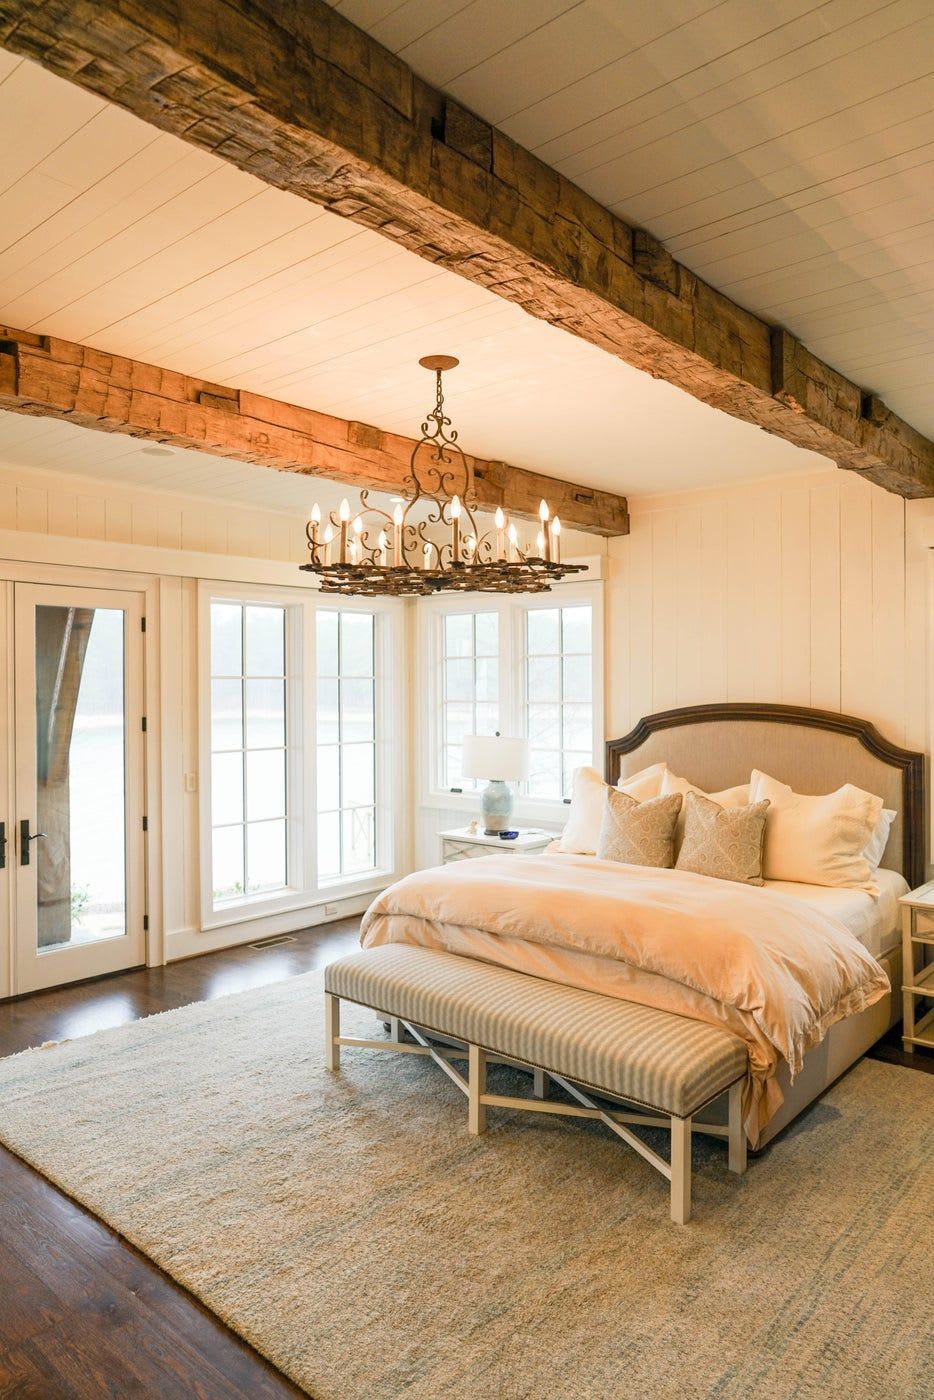 24 Cabin-Style Bedrooms Inspired by a Rustic Getaway | Cabin style bedroom, Cabin style, Elegant master bedroom